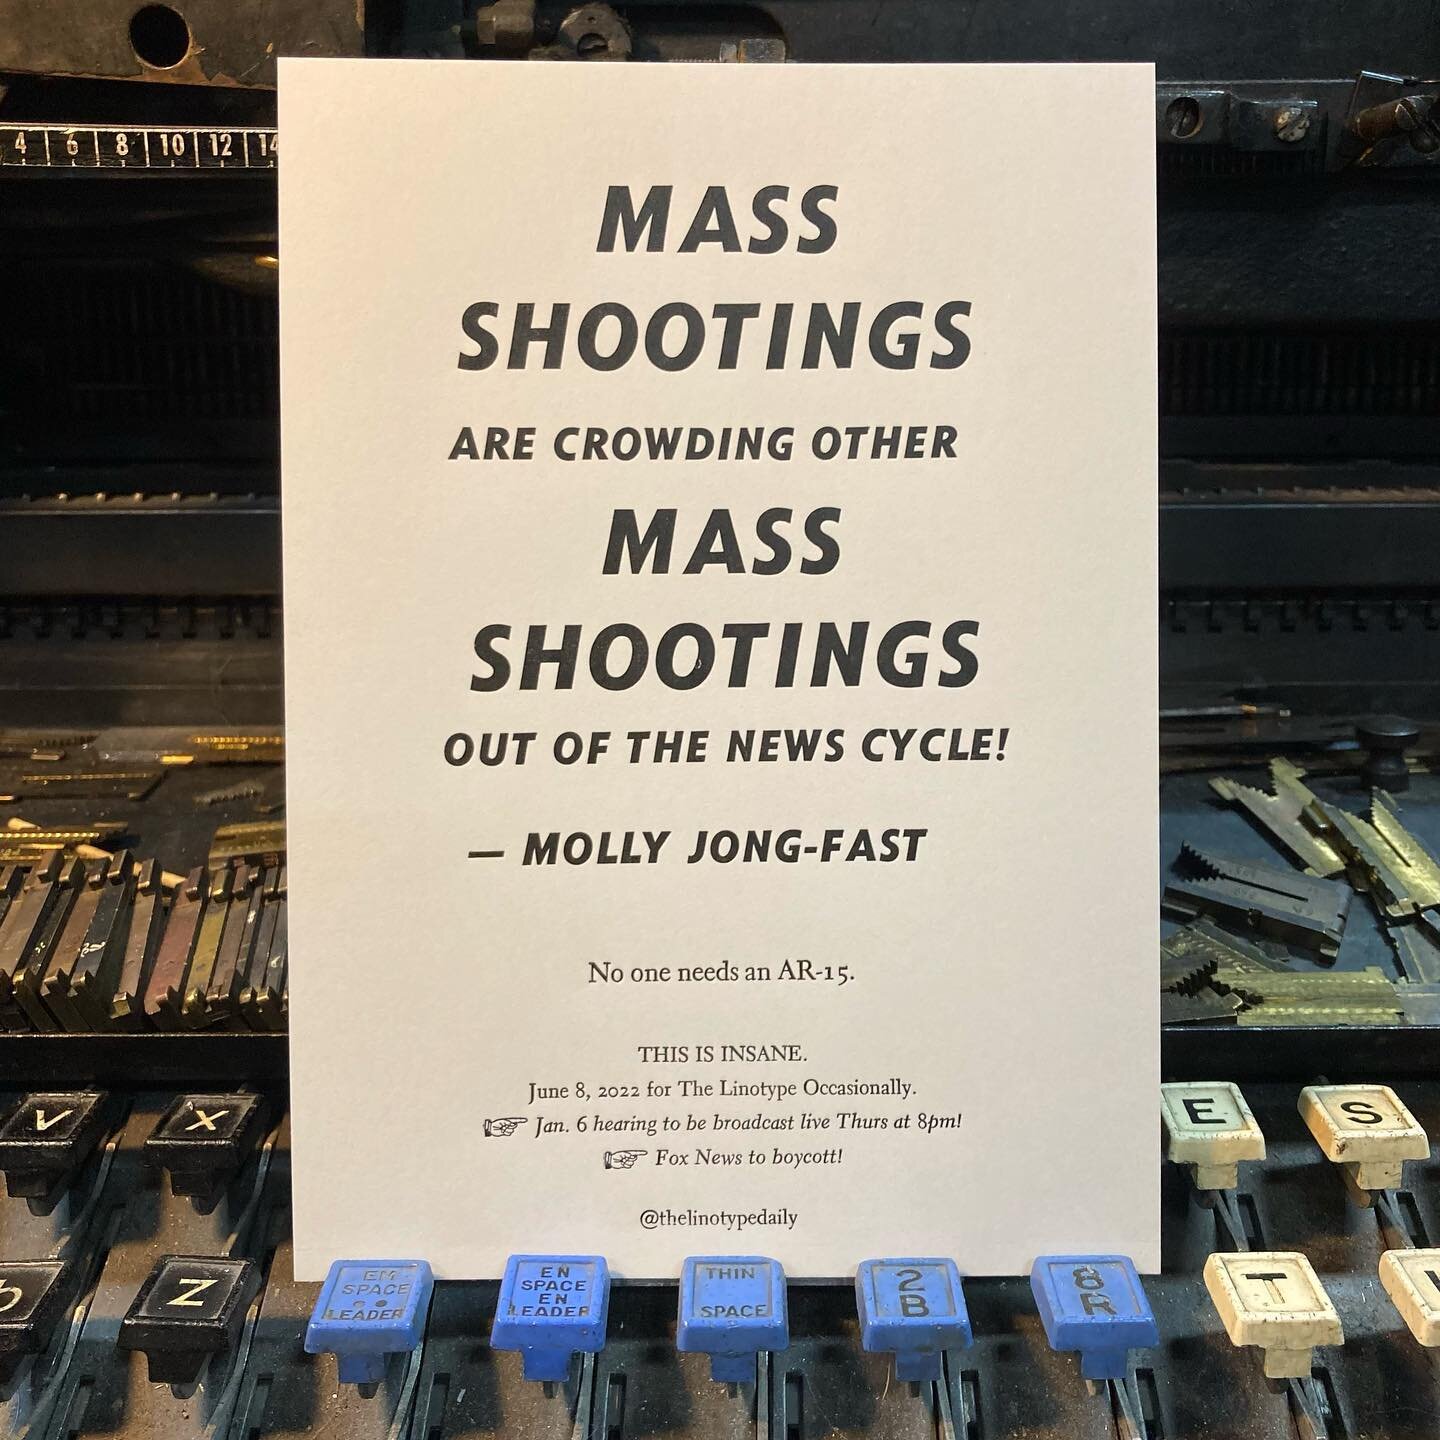 &quot;mother's life mattered. My mother's life mattered.&quot;
 &mdash; Garnell Whitfield, Jr., son of Buffalo shooting victim Ruth Whitfield, testifying in Congress yesterday. #letterpress #linotype #gunviolence #massshooting #buffaloshooting #uvald